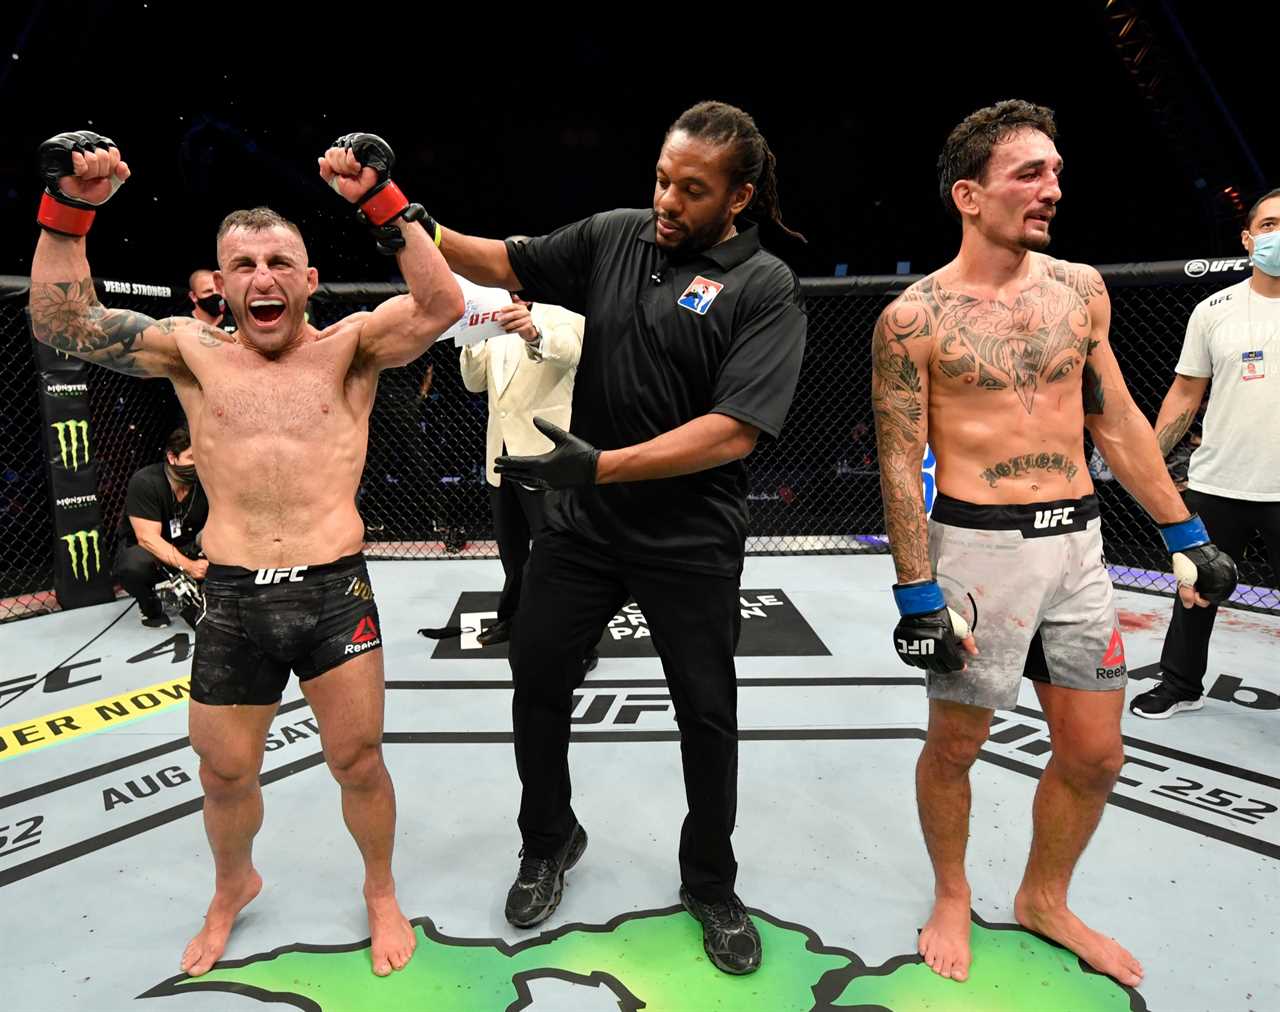 UFC 272 card released with world title fights, including Max Holloway against Alexander Volkanovski Trilogy